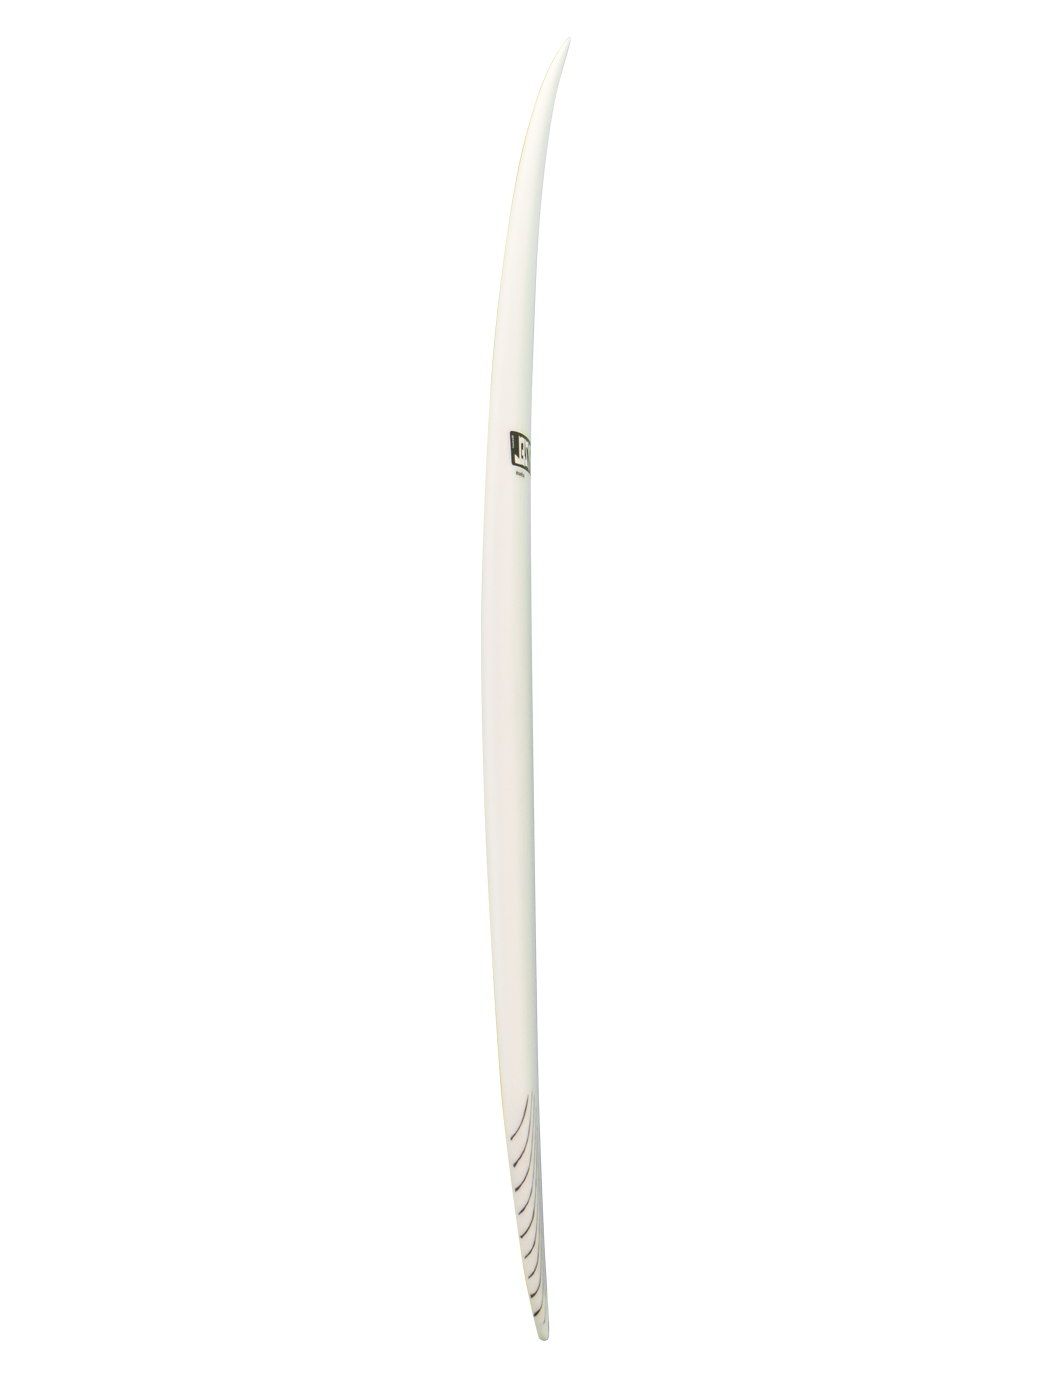 Pyzel Surfboards - Voyager 1